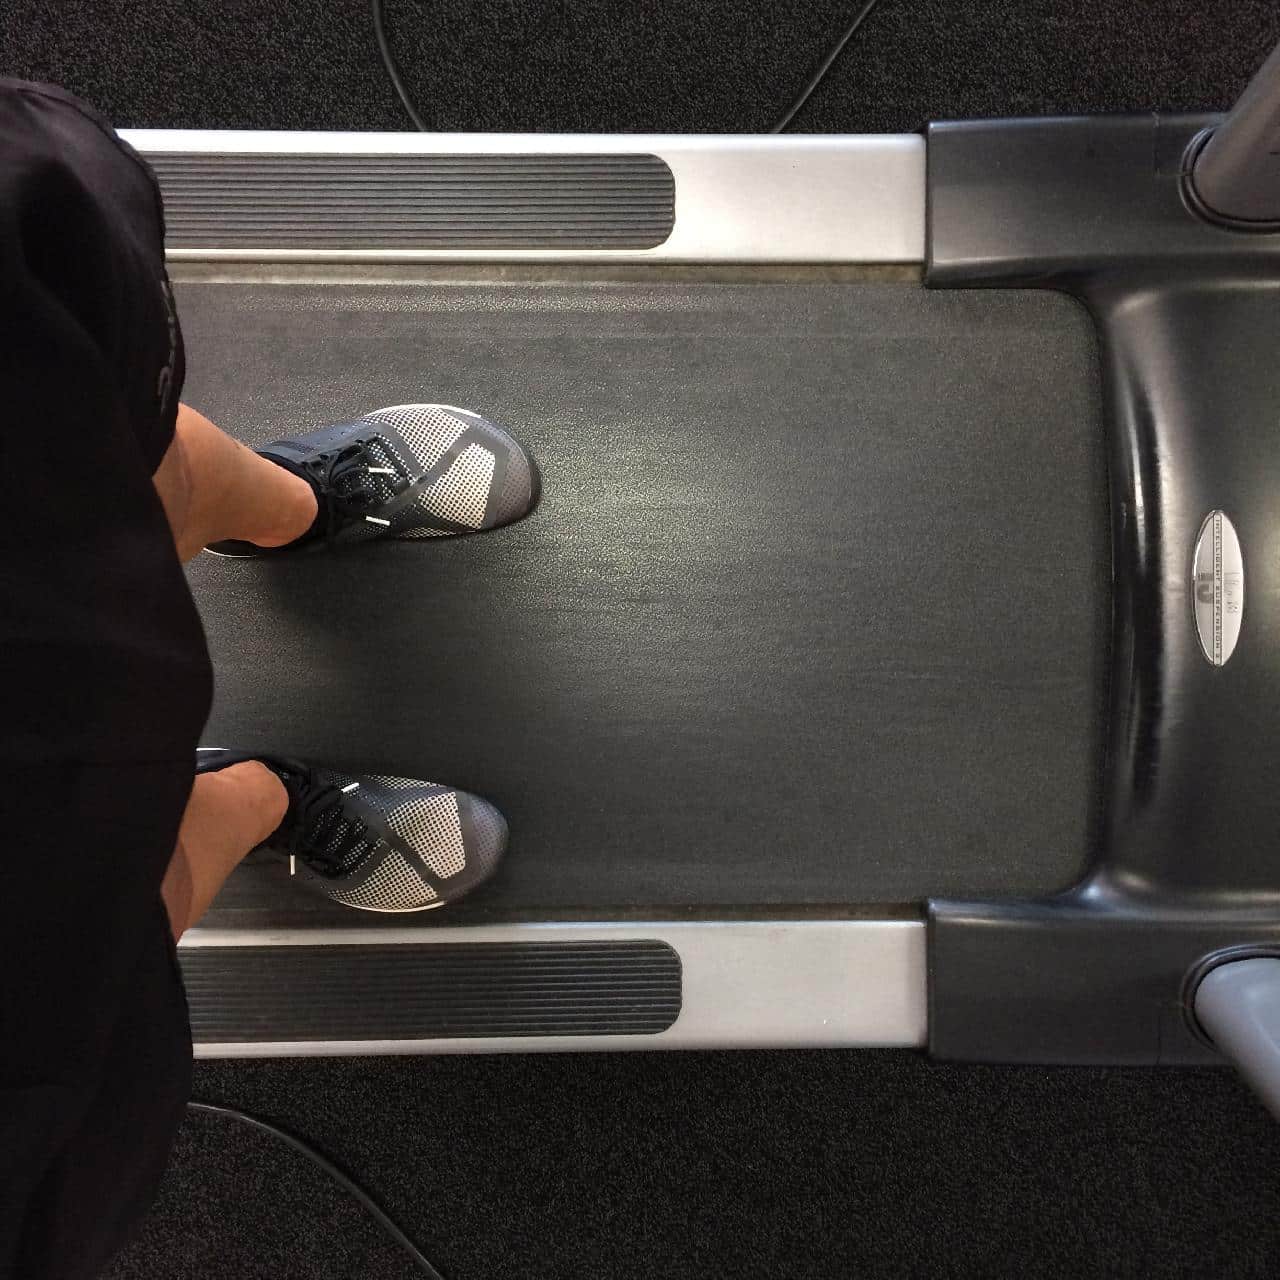 Money Lessons Learned: Using a Treadmill